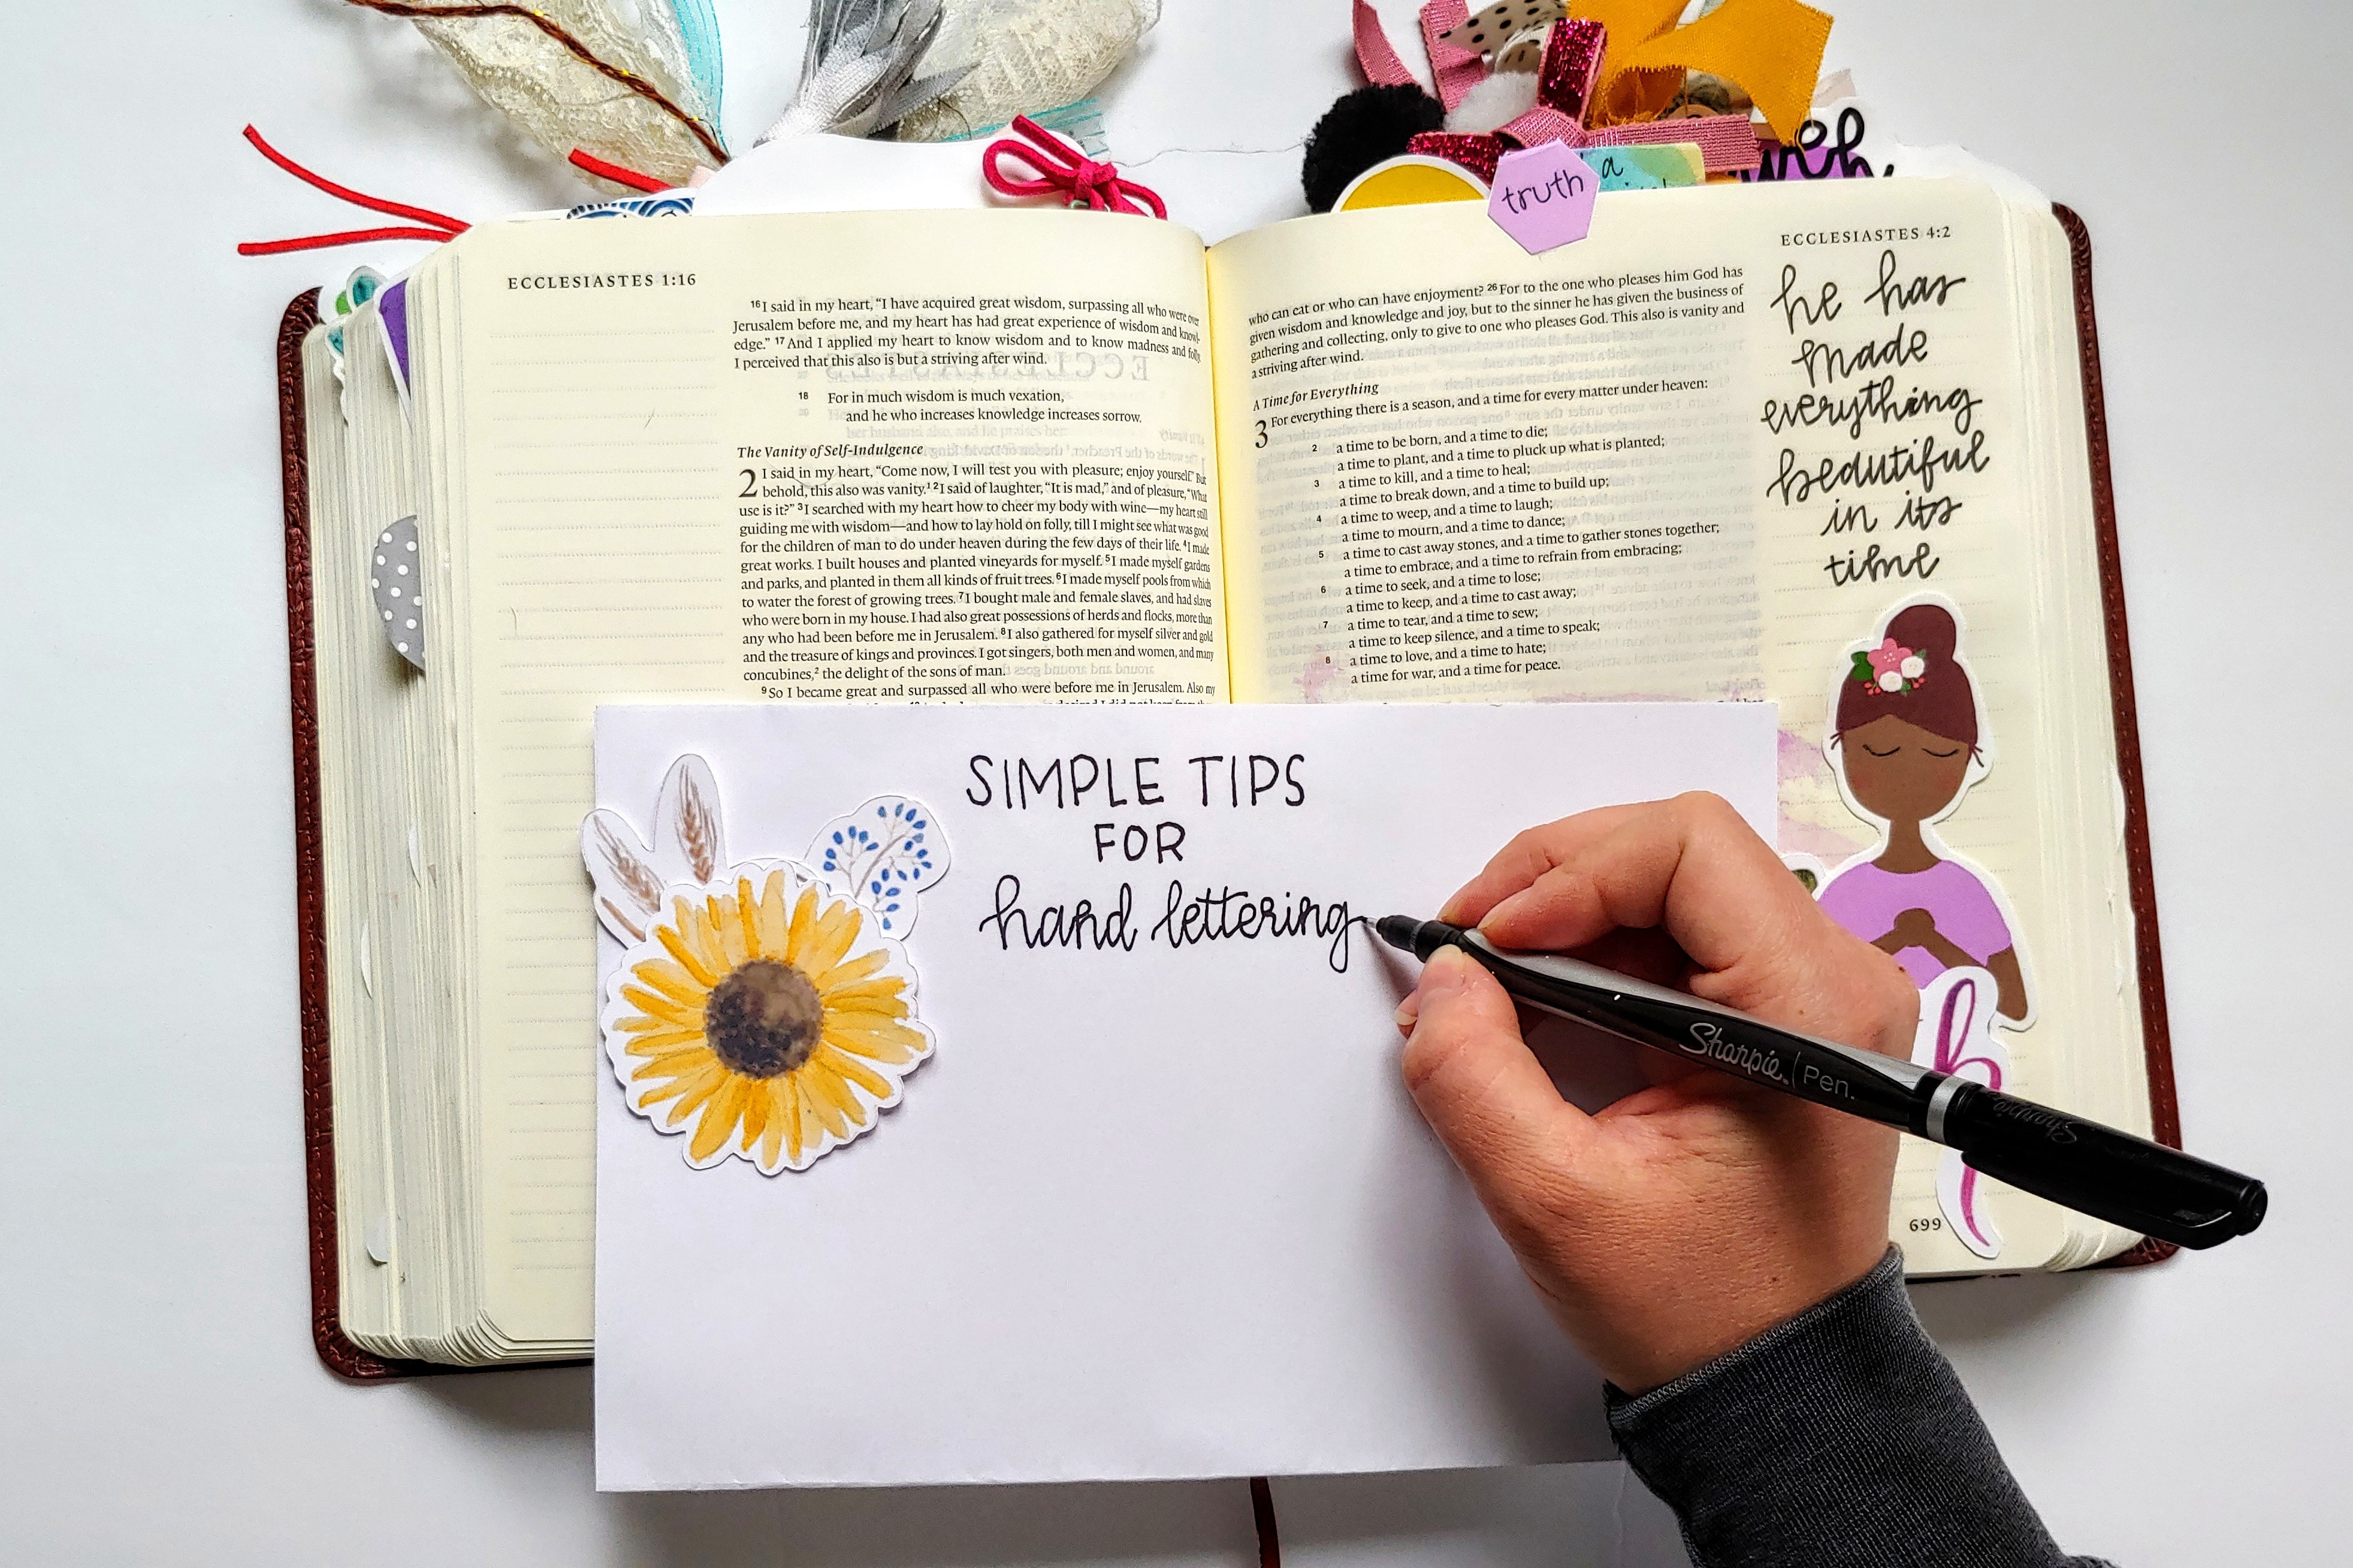 Open Bible and girl hand lettering "Simple tips for hand lettering"